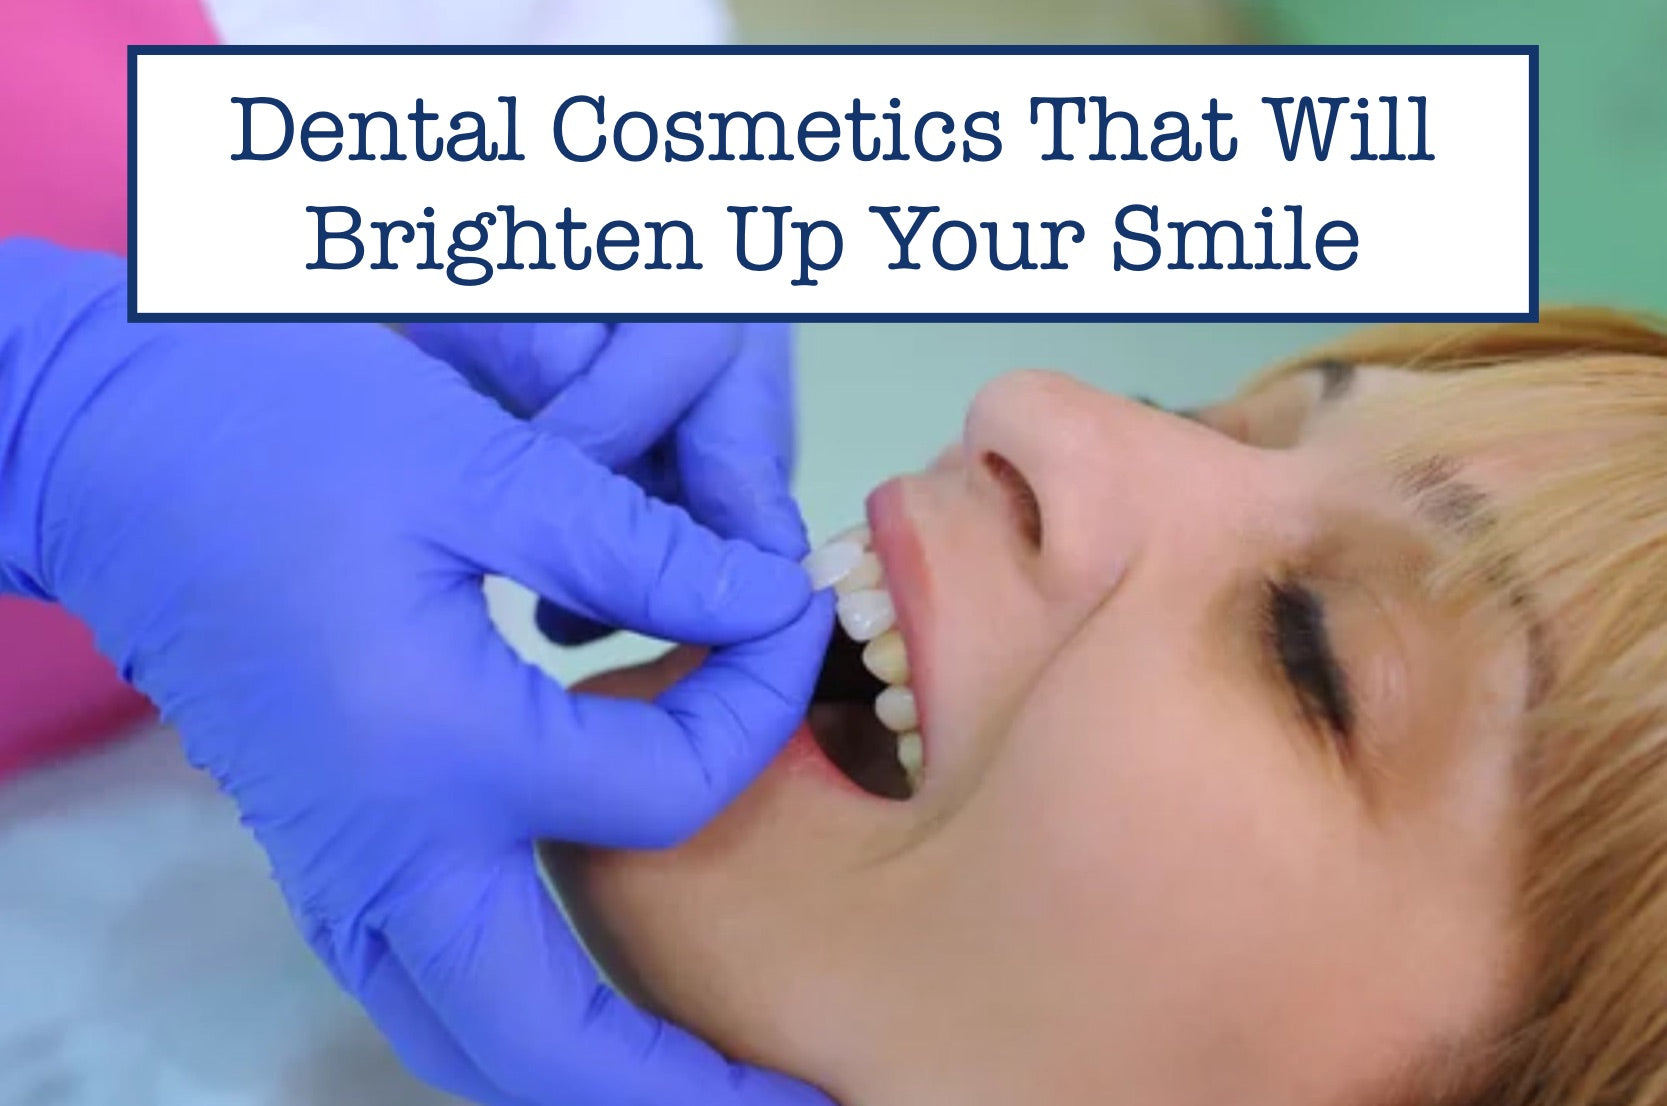 Dental Cosmetics That Will Brighten Up Your Smile